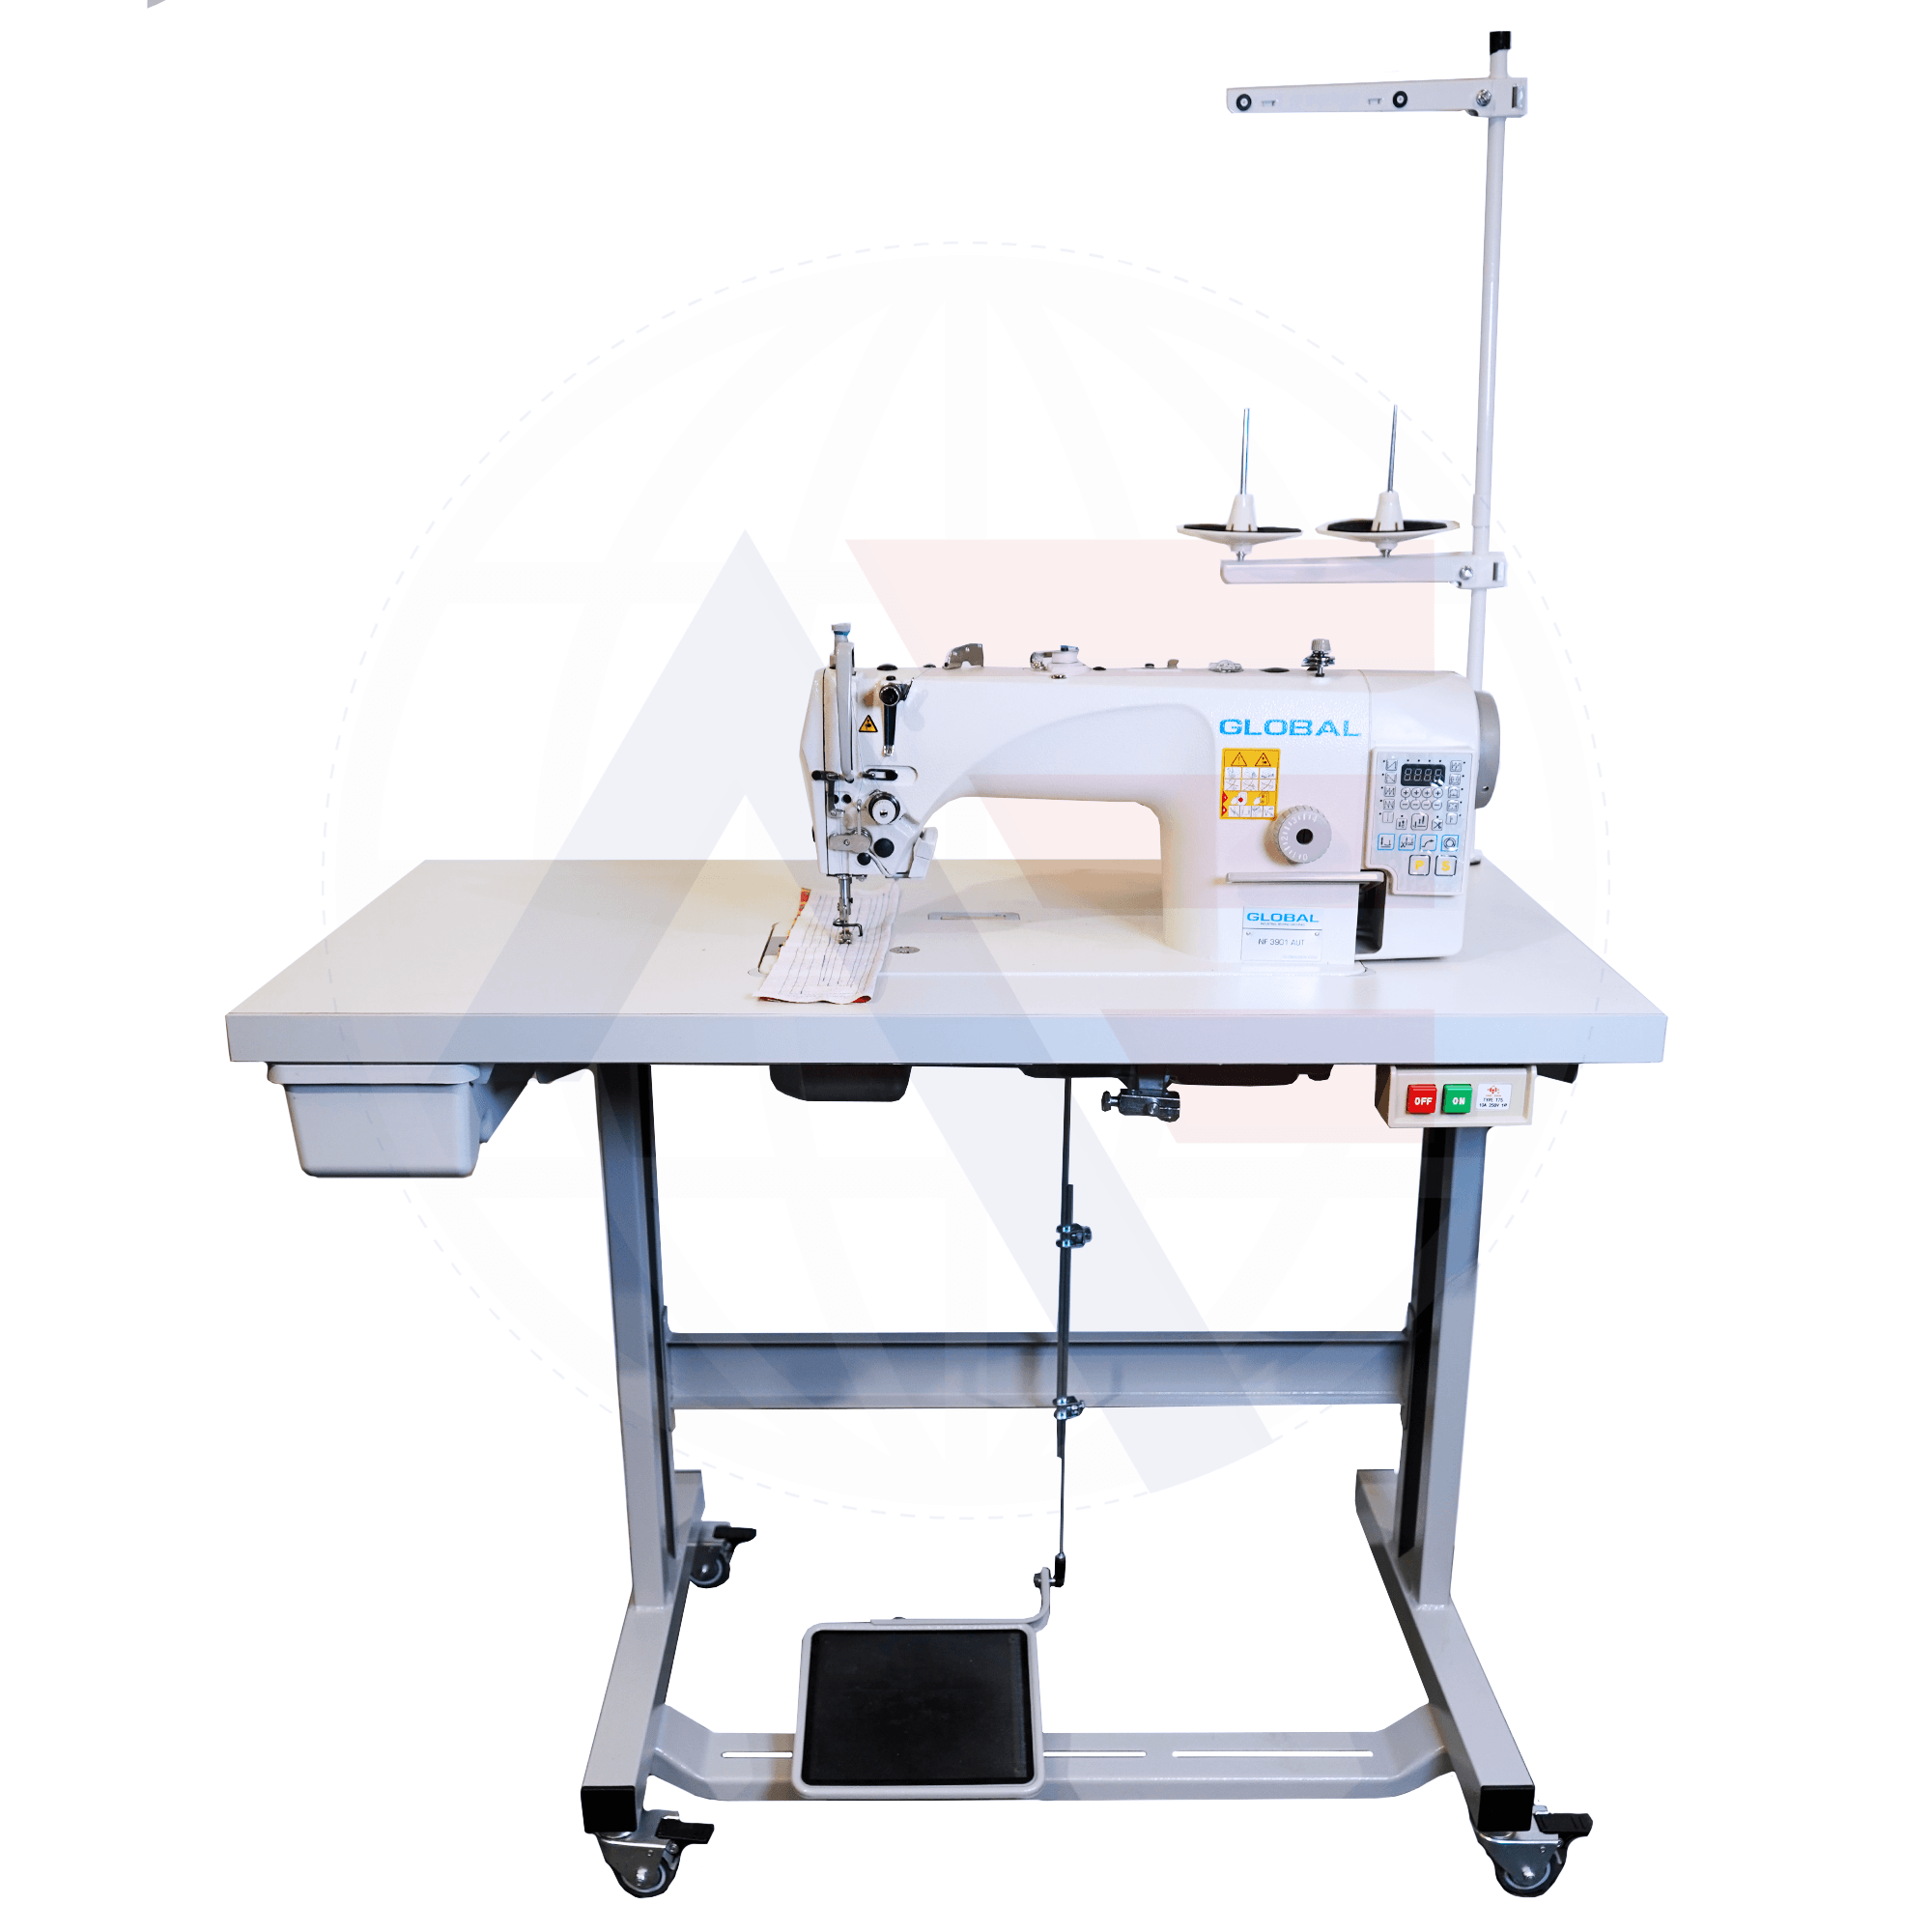 Ex-Demo - Global Nf 3901 Aut Needle-Feed Lockstitch Machine With Automatic Functions Sewing Machines